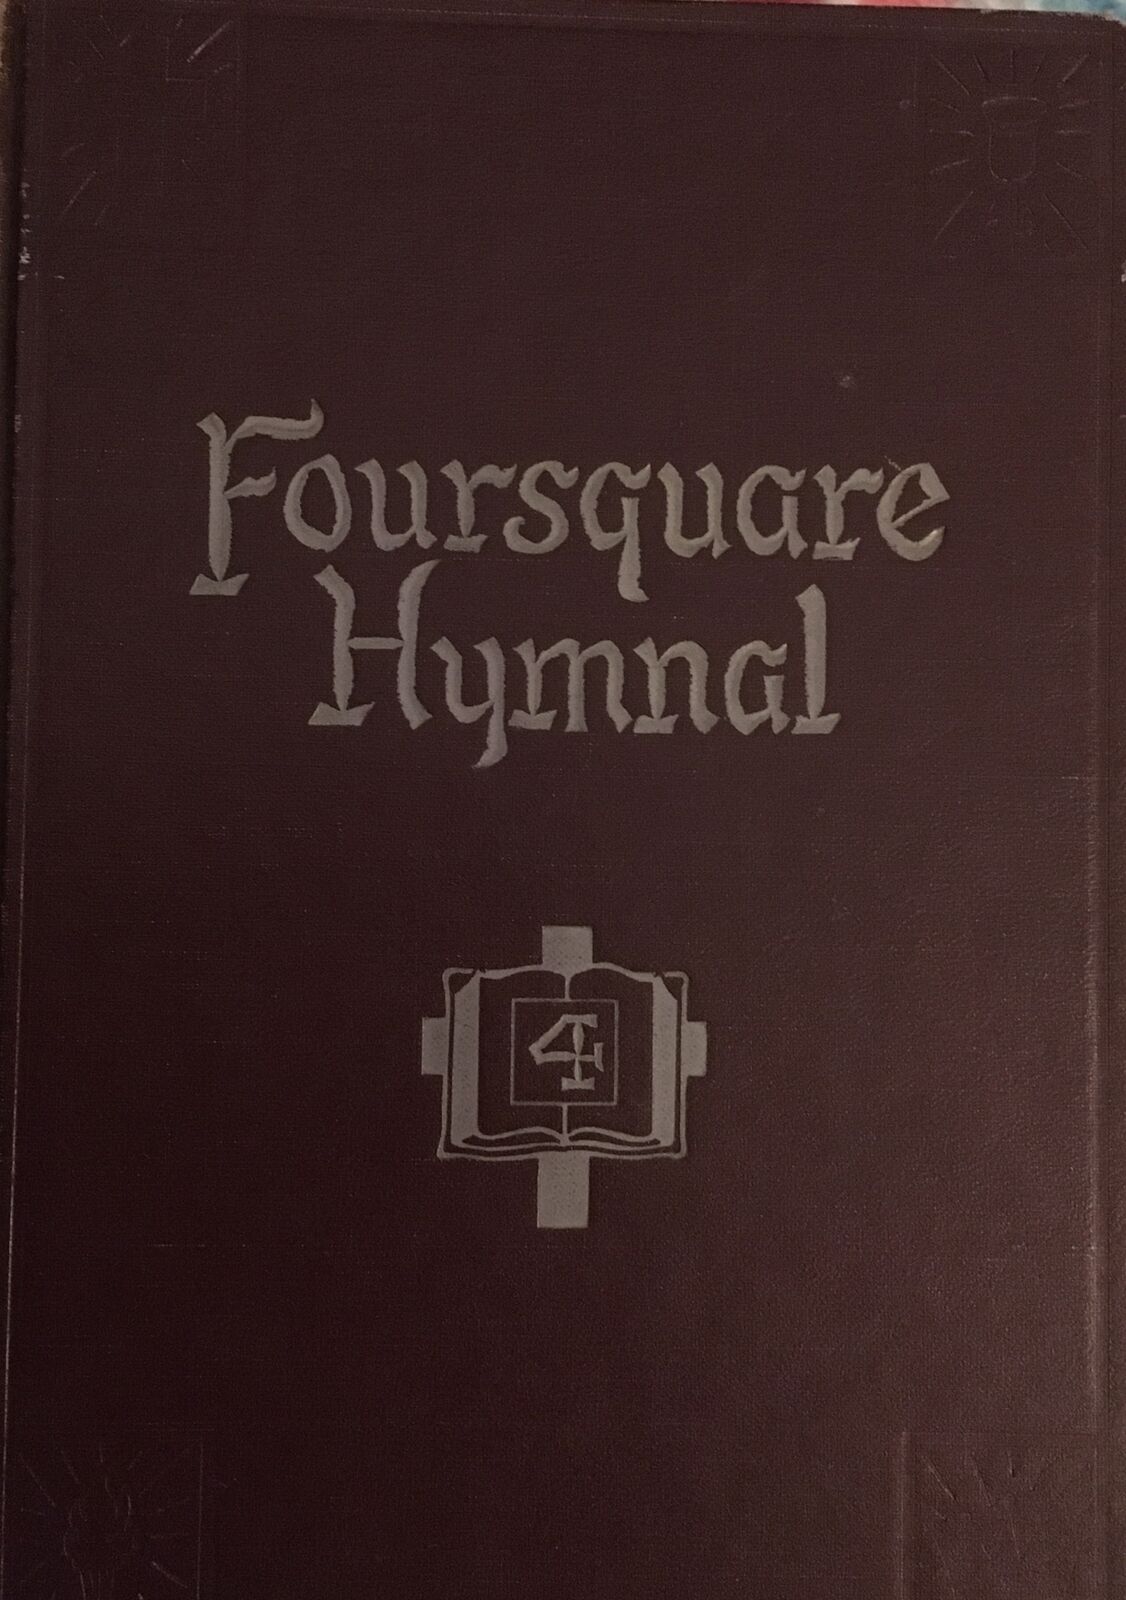 Four square Hymnal